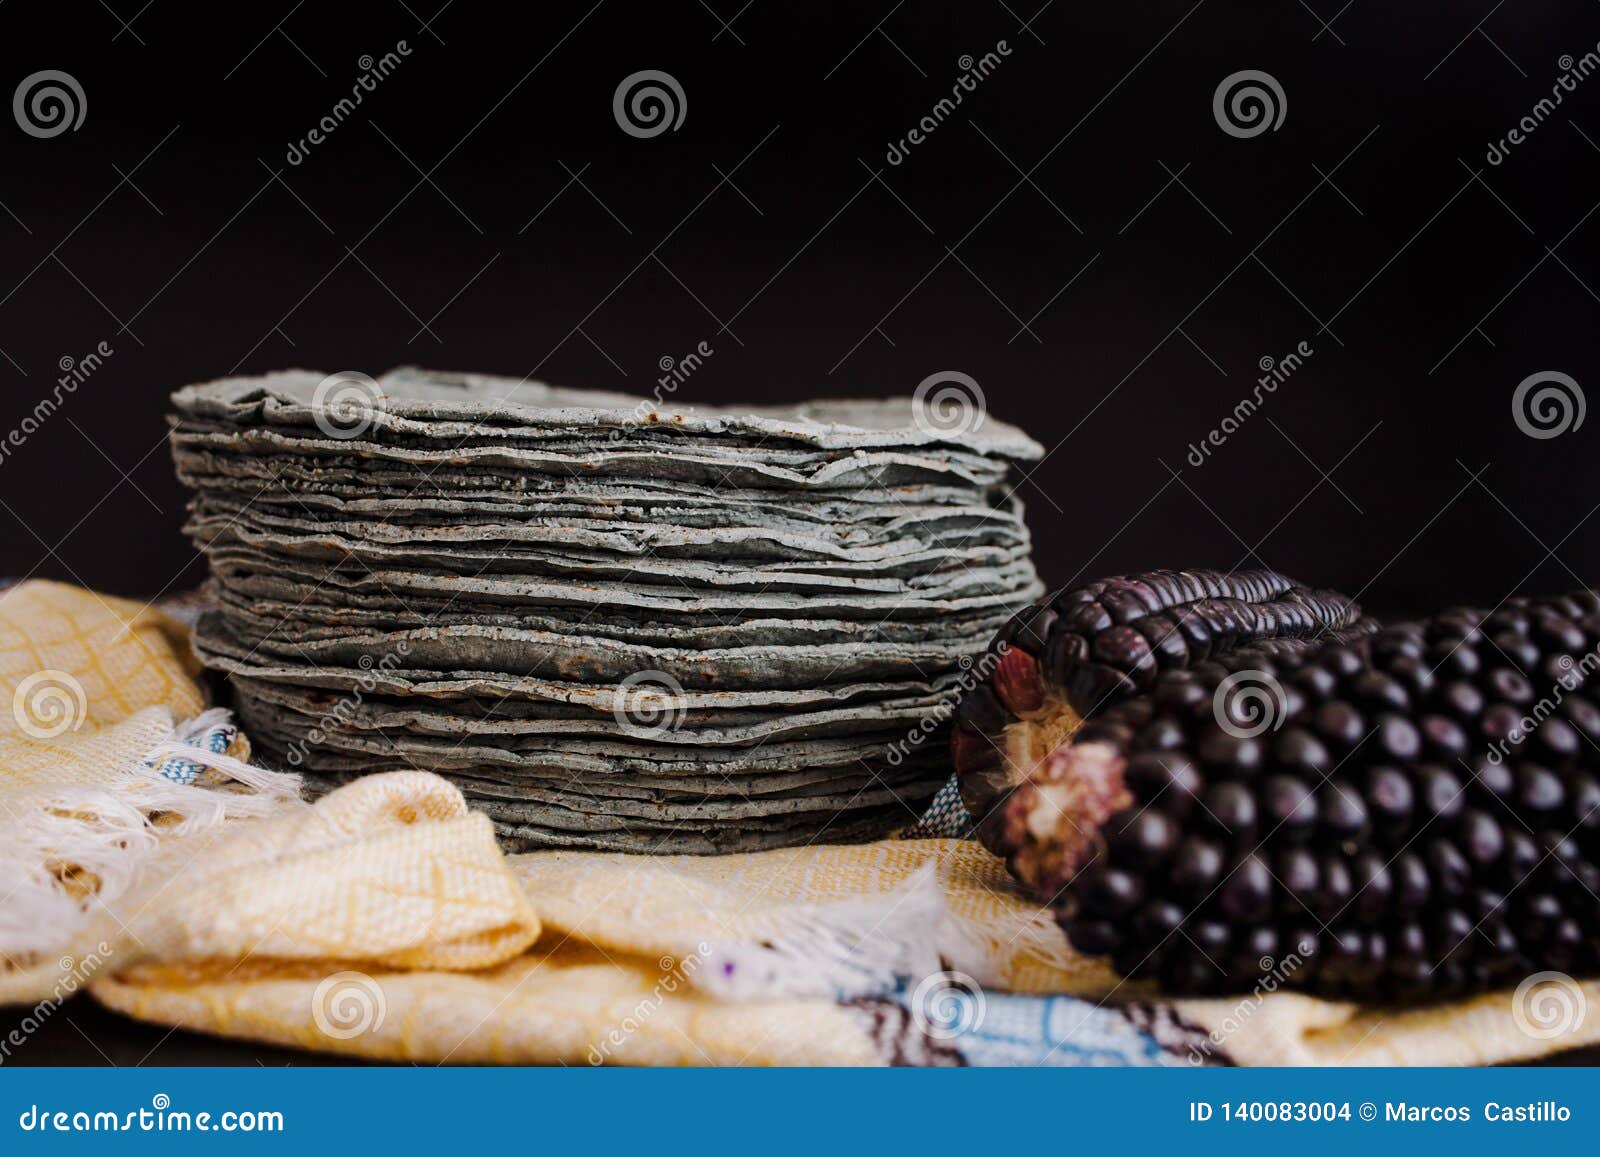 tortillas azules, blue corn, mexican food traditional food in mexico